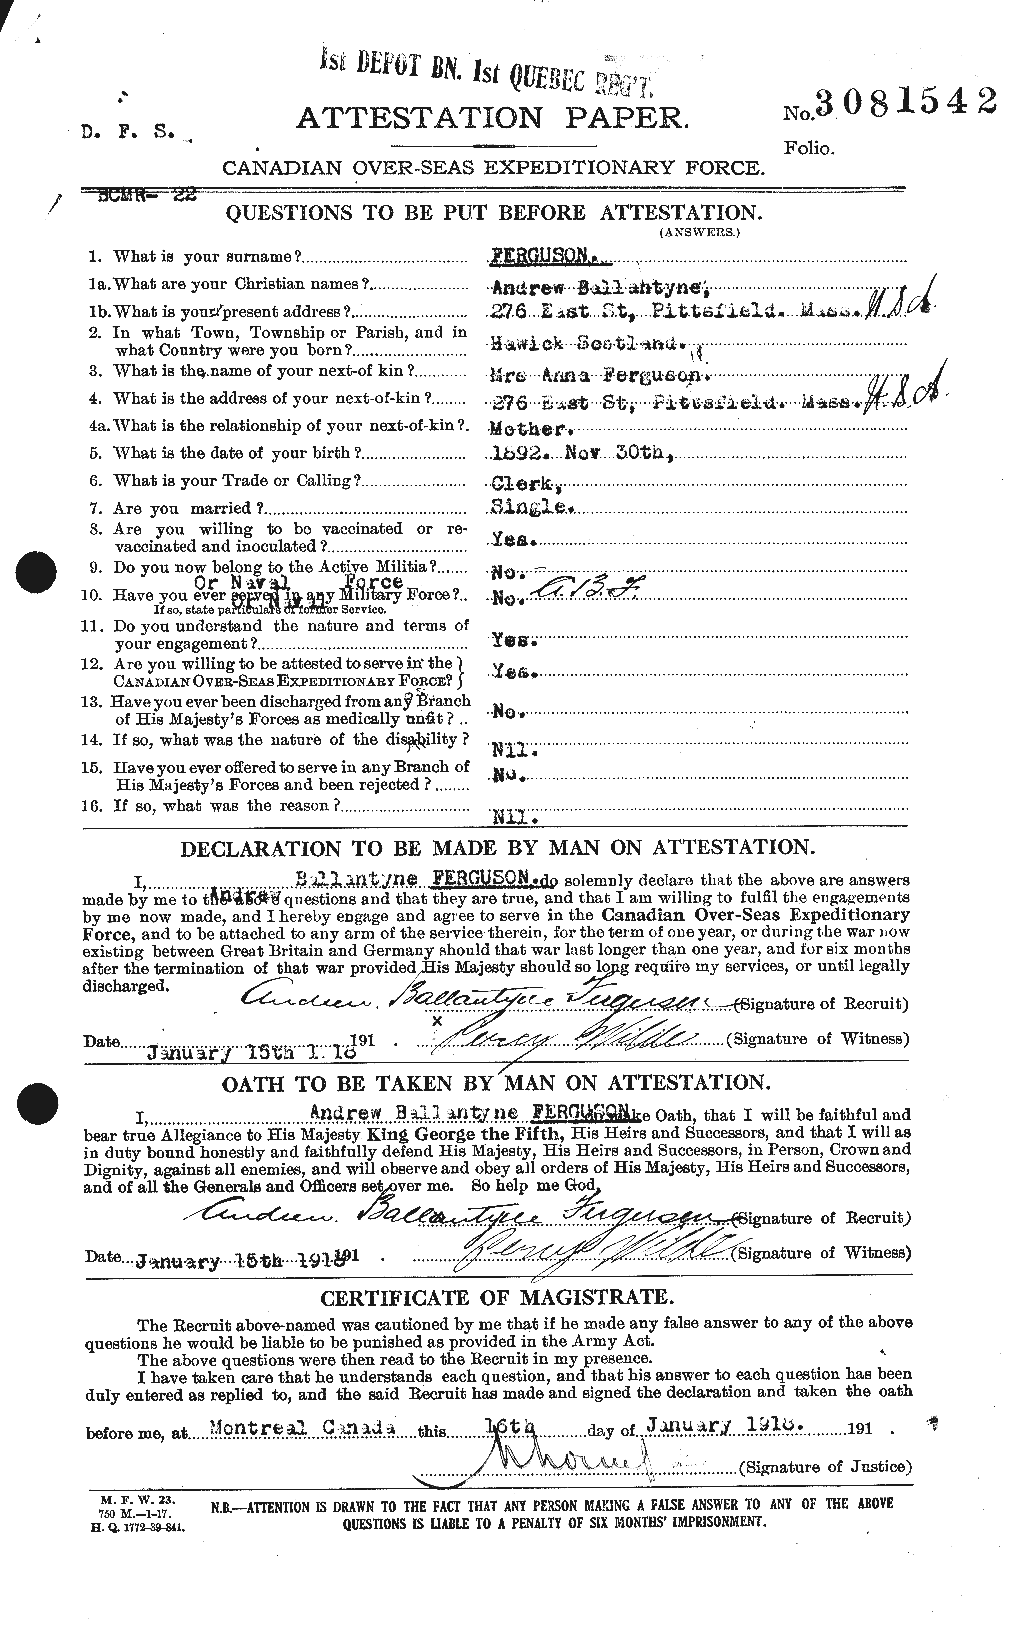 Personnel Records of the First World War - CEF 318884a